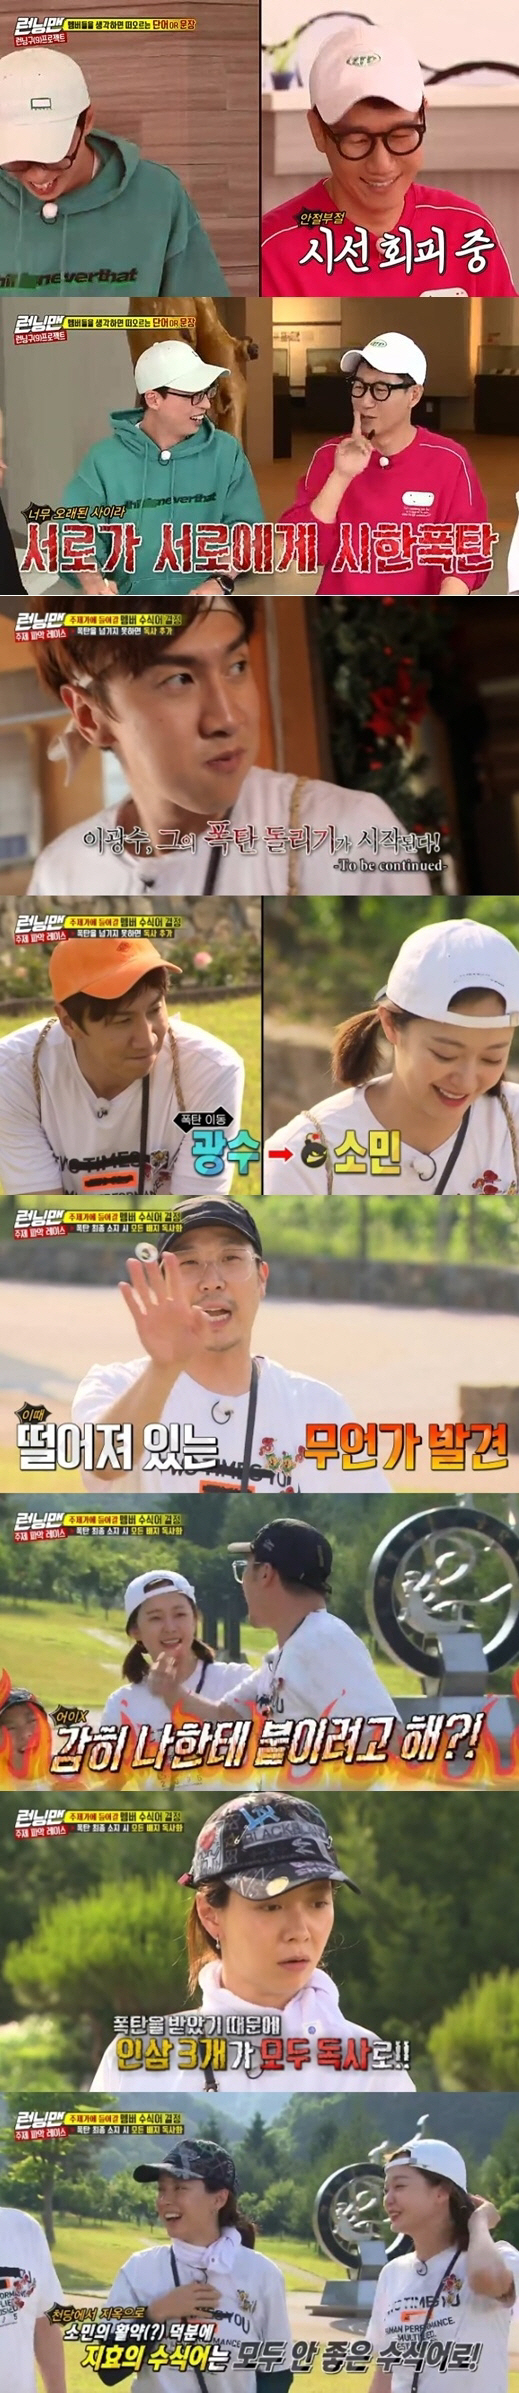 SBS Running Man kept the top spot in the same time zone of 2049 target audience rating.The broadcast was decorated with a theme-reading race for the theme song to be presented at the Fan Meeting this summer.The members had to set the number of good modifiers ( Ginseng badges) and bad modifiers (poison badges) of the theme song while they decided to participate in the songwriting of the theme song themselves, and had to move to the bomb within an hour of the bomb because there was a bomb.Because there is a time limit for bombs, if you pass that time, you will get a viper badge. Even if you take it, you will get another viper badge.Among them, Jeon So-min showed off the like a poison that led to the reversal, shook the plate of the race, and noticed that he had a bomb late on the last mission.The scene soared to 8.4% of the audience rating per minute, accounting for the best one minute.So, Jeon So-min showed boldness of handing over his bomb to Song Ji-ryu, and Song Ji-hyo, who ran Race 1st pRace, had to watch his ginseng badge turned into a poison badge at the last minute.Yoo Jae-Suk took the first pRace in the race with Fisherman Jiri, and Yoo Jae-Suk chose a modifier to enter the theme song based on the badge of each member.The Running Man Theme Song, which participated in the members lyrics, will be unveiled at the Running Man Fan Meeting to be held this summer.